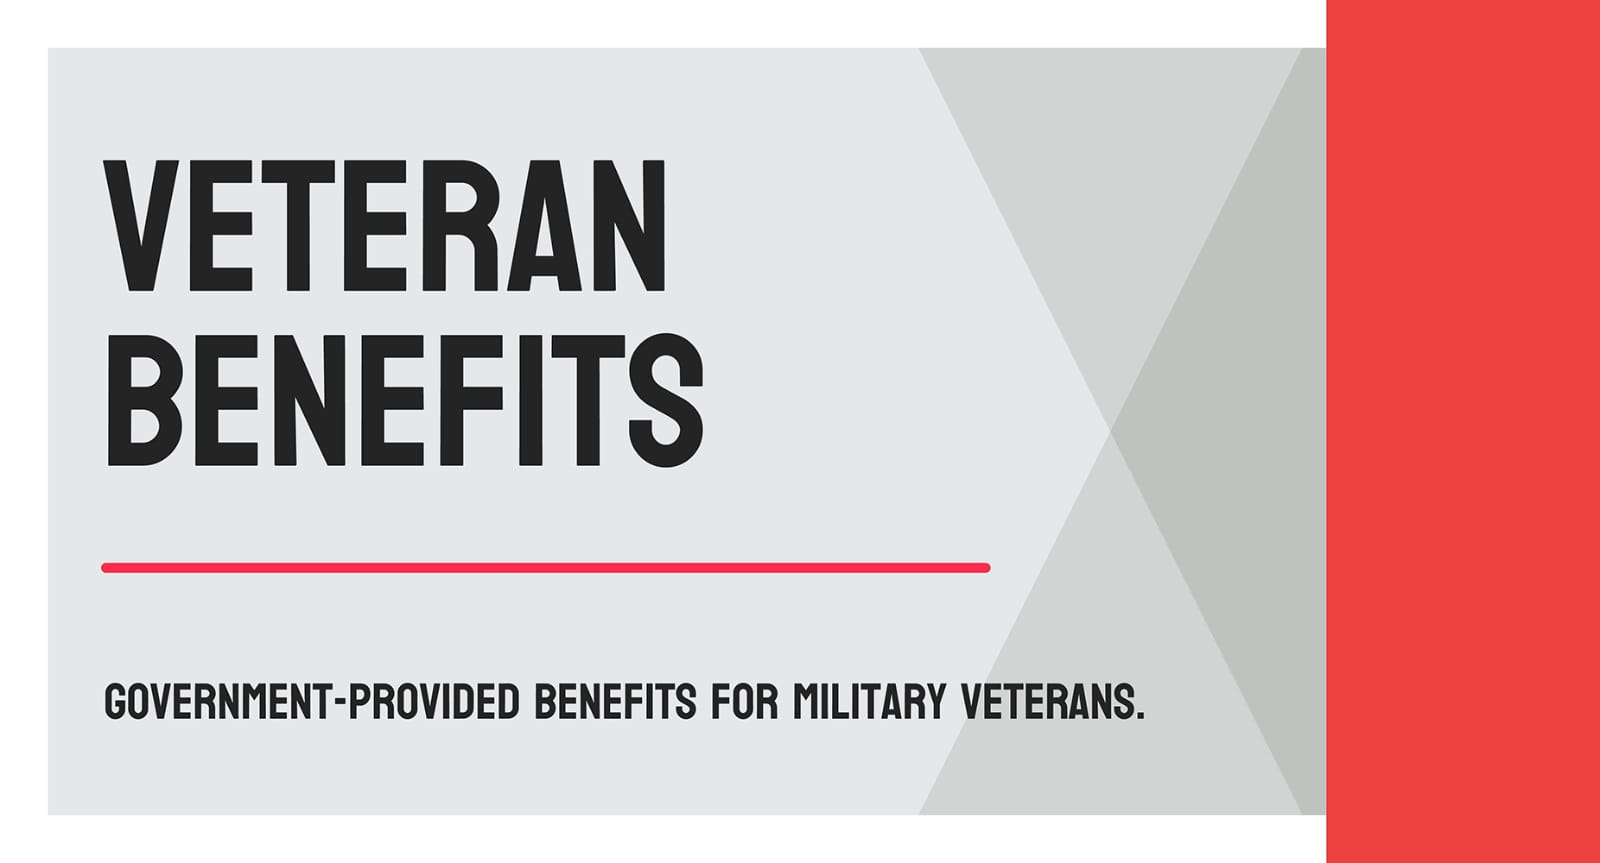 Ten Essential Factors Impacting The Duration Of Your VA Claim Approval And Ways To Speed Up The Proc...